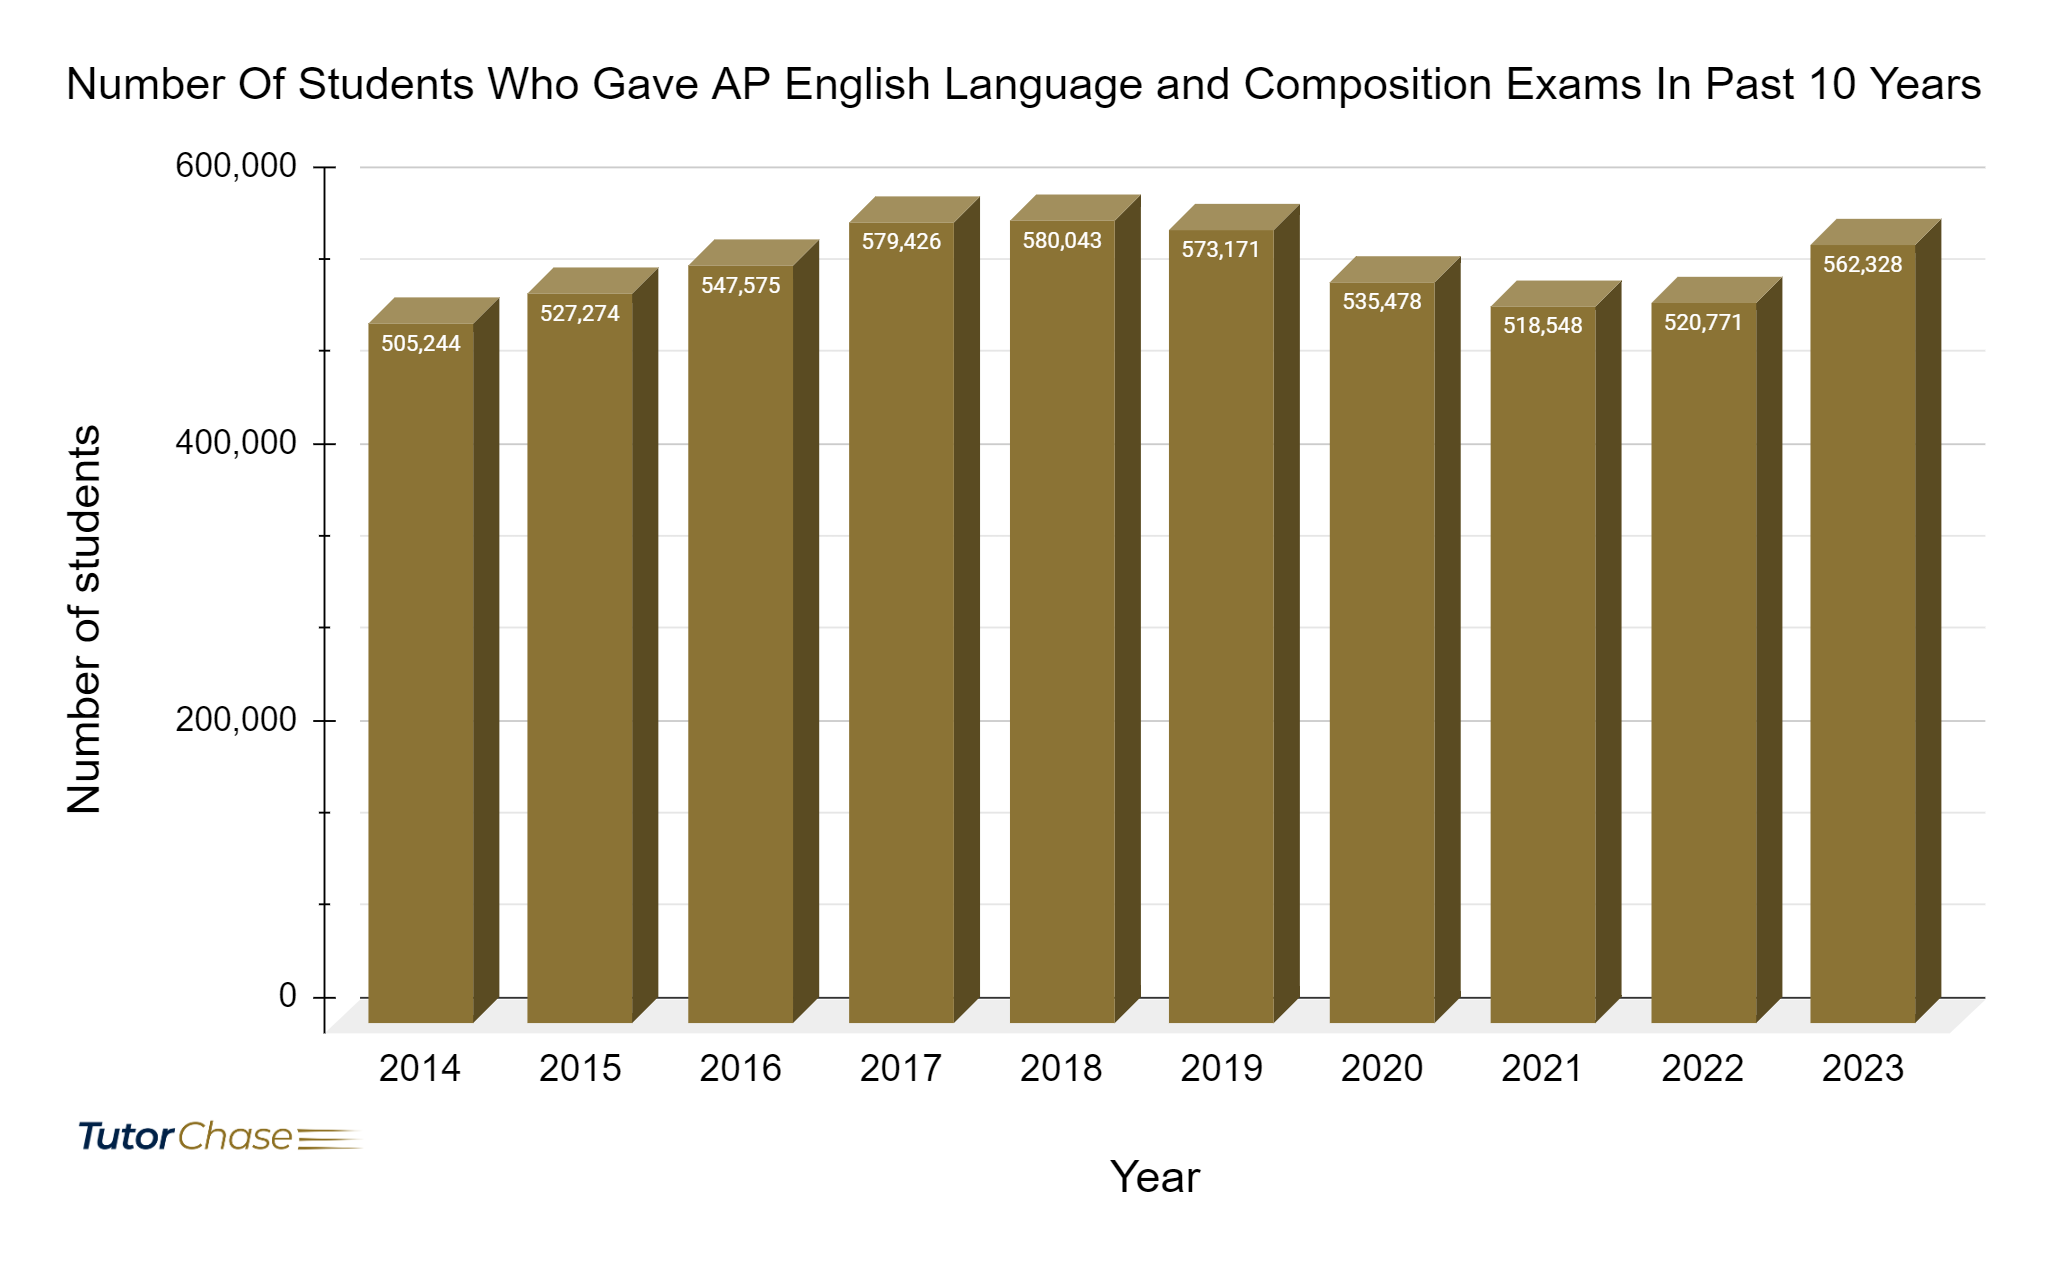 Number of students who gave AP English Language and Composition Exams